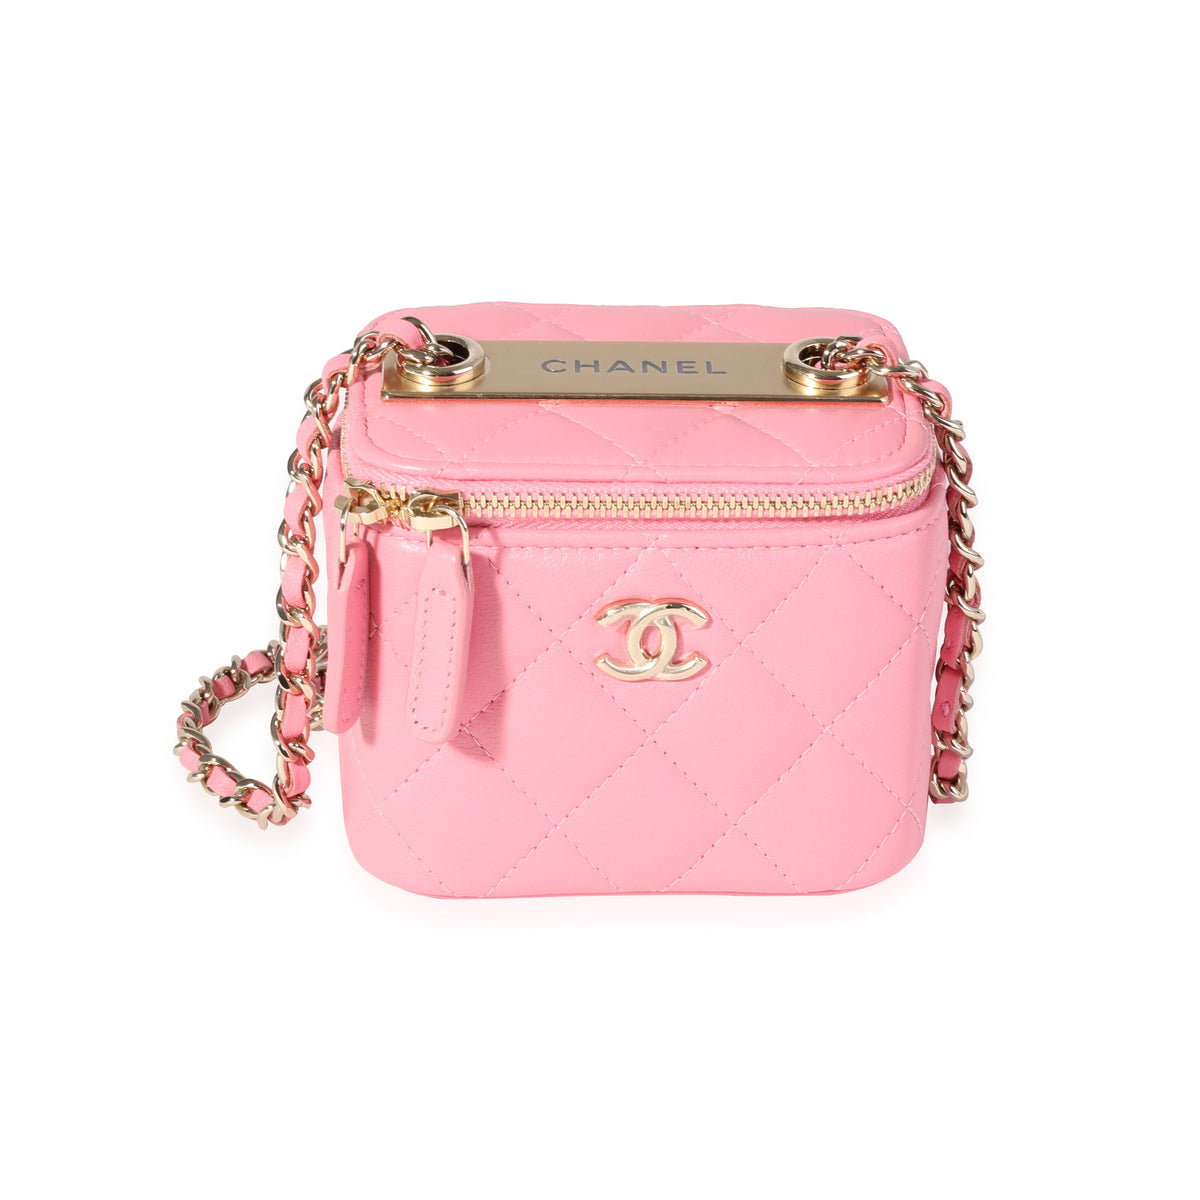 Chanel Light Pink Quilted Lambskin Mini Vanity with Chain, myGemma